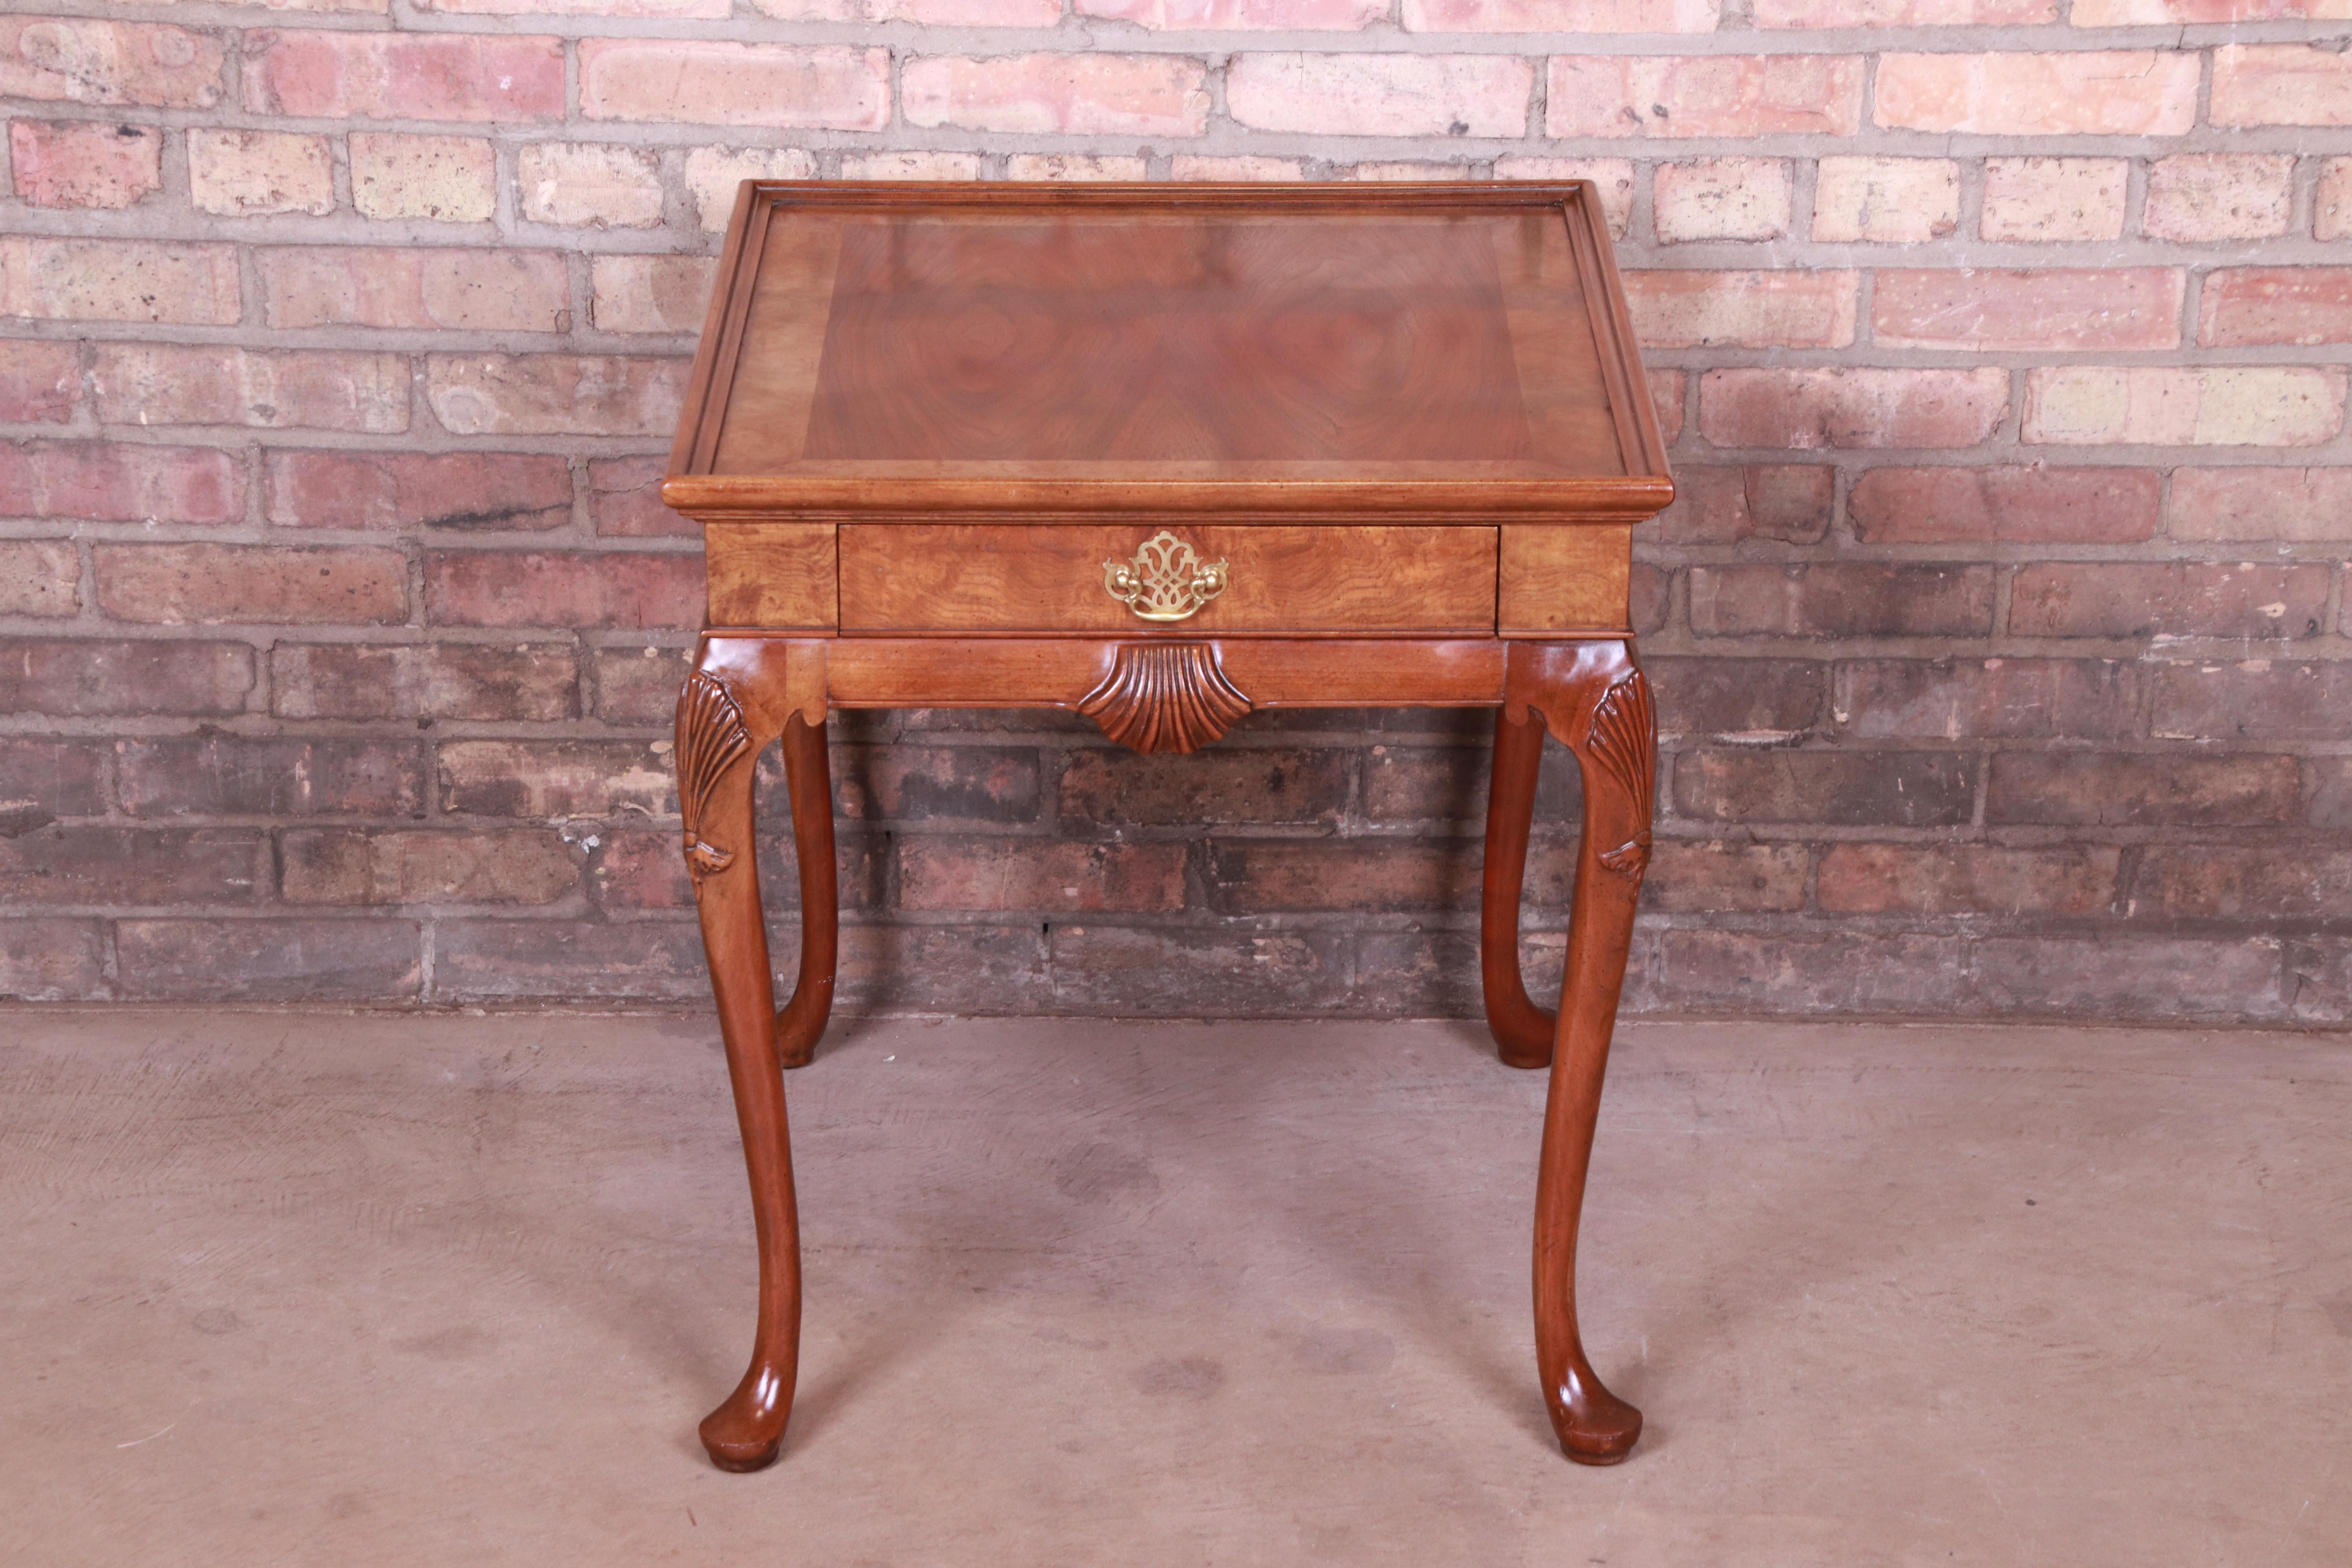 A gorgeous traditional Queen Anne style single drawer nightstand or side table

By Baker Furniture

USA, circa 1980s

Book-matched walnut top, carved solid walnut legs with shell motif, burl wood drawer front and trim, and original brass